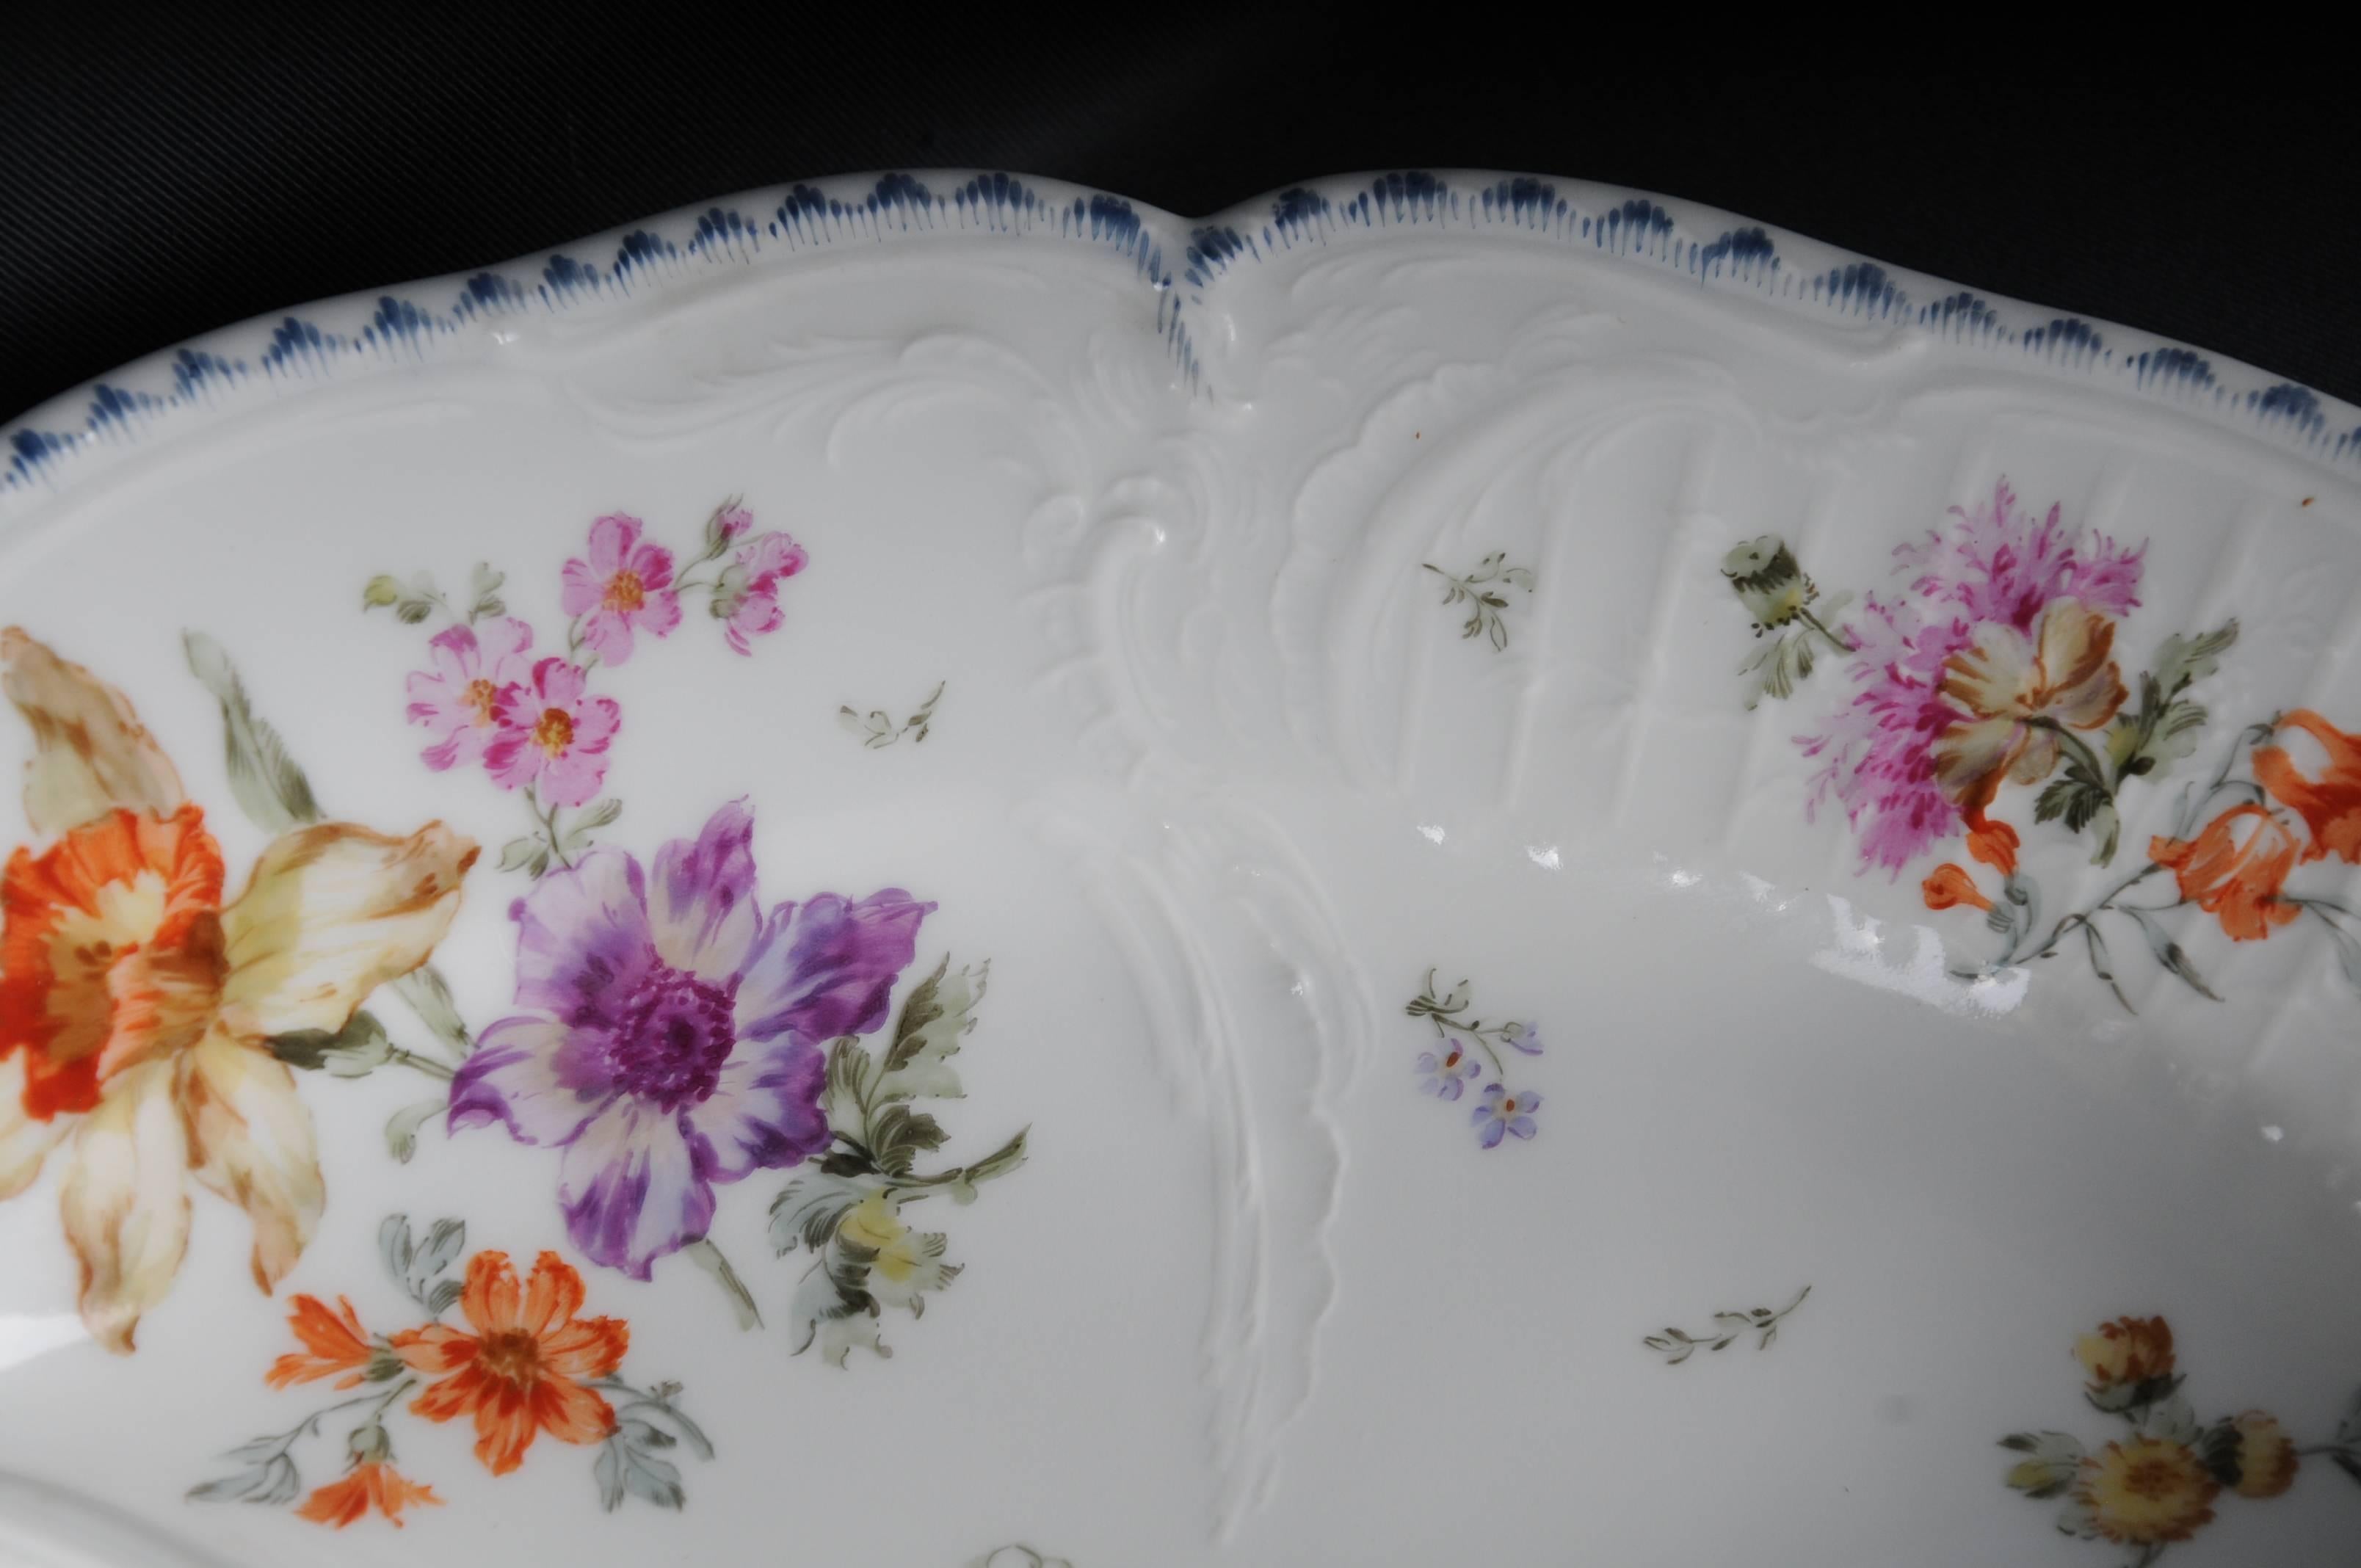 Porcelain 19th Century KPM Berlin Rare Confectionery Dish with Three Sections